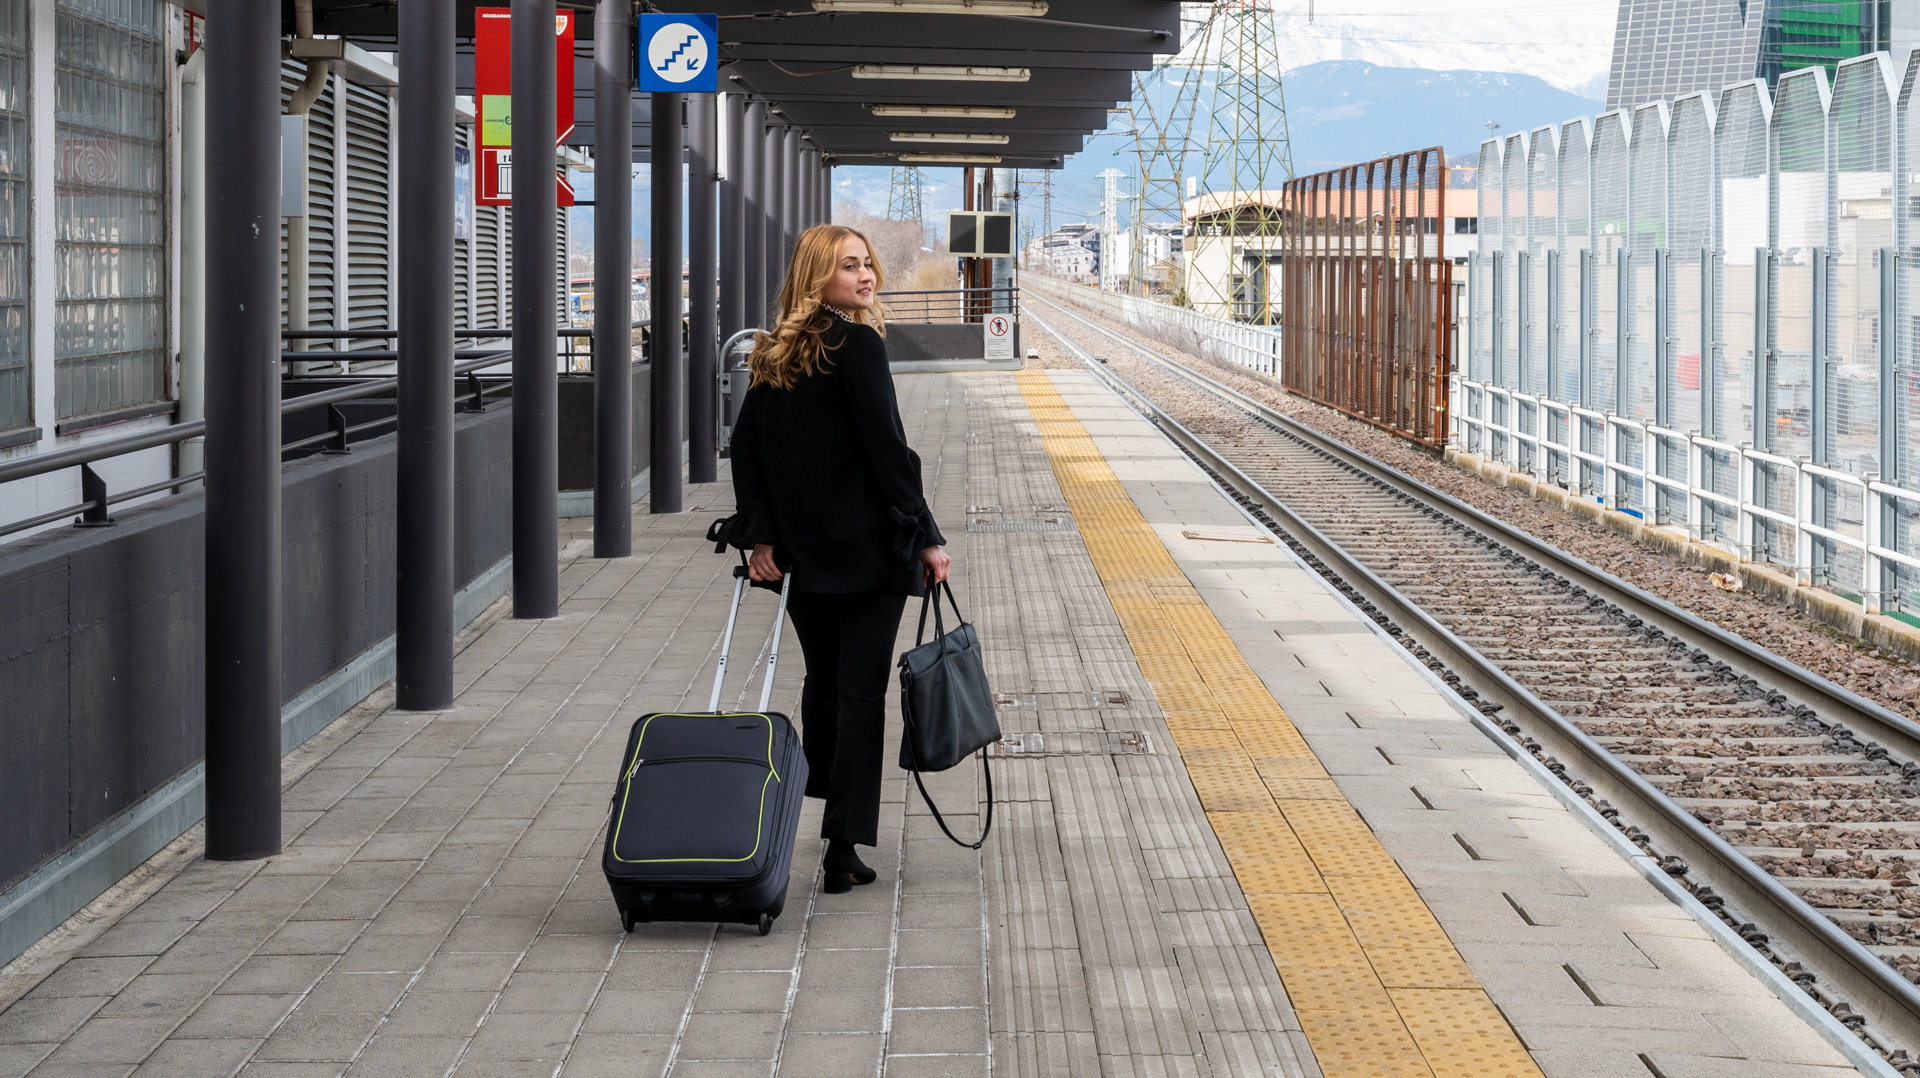 A woman with a bag and a suitcase is walking down the train platform. She is looking towards the rail tracks.